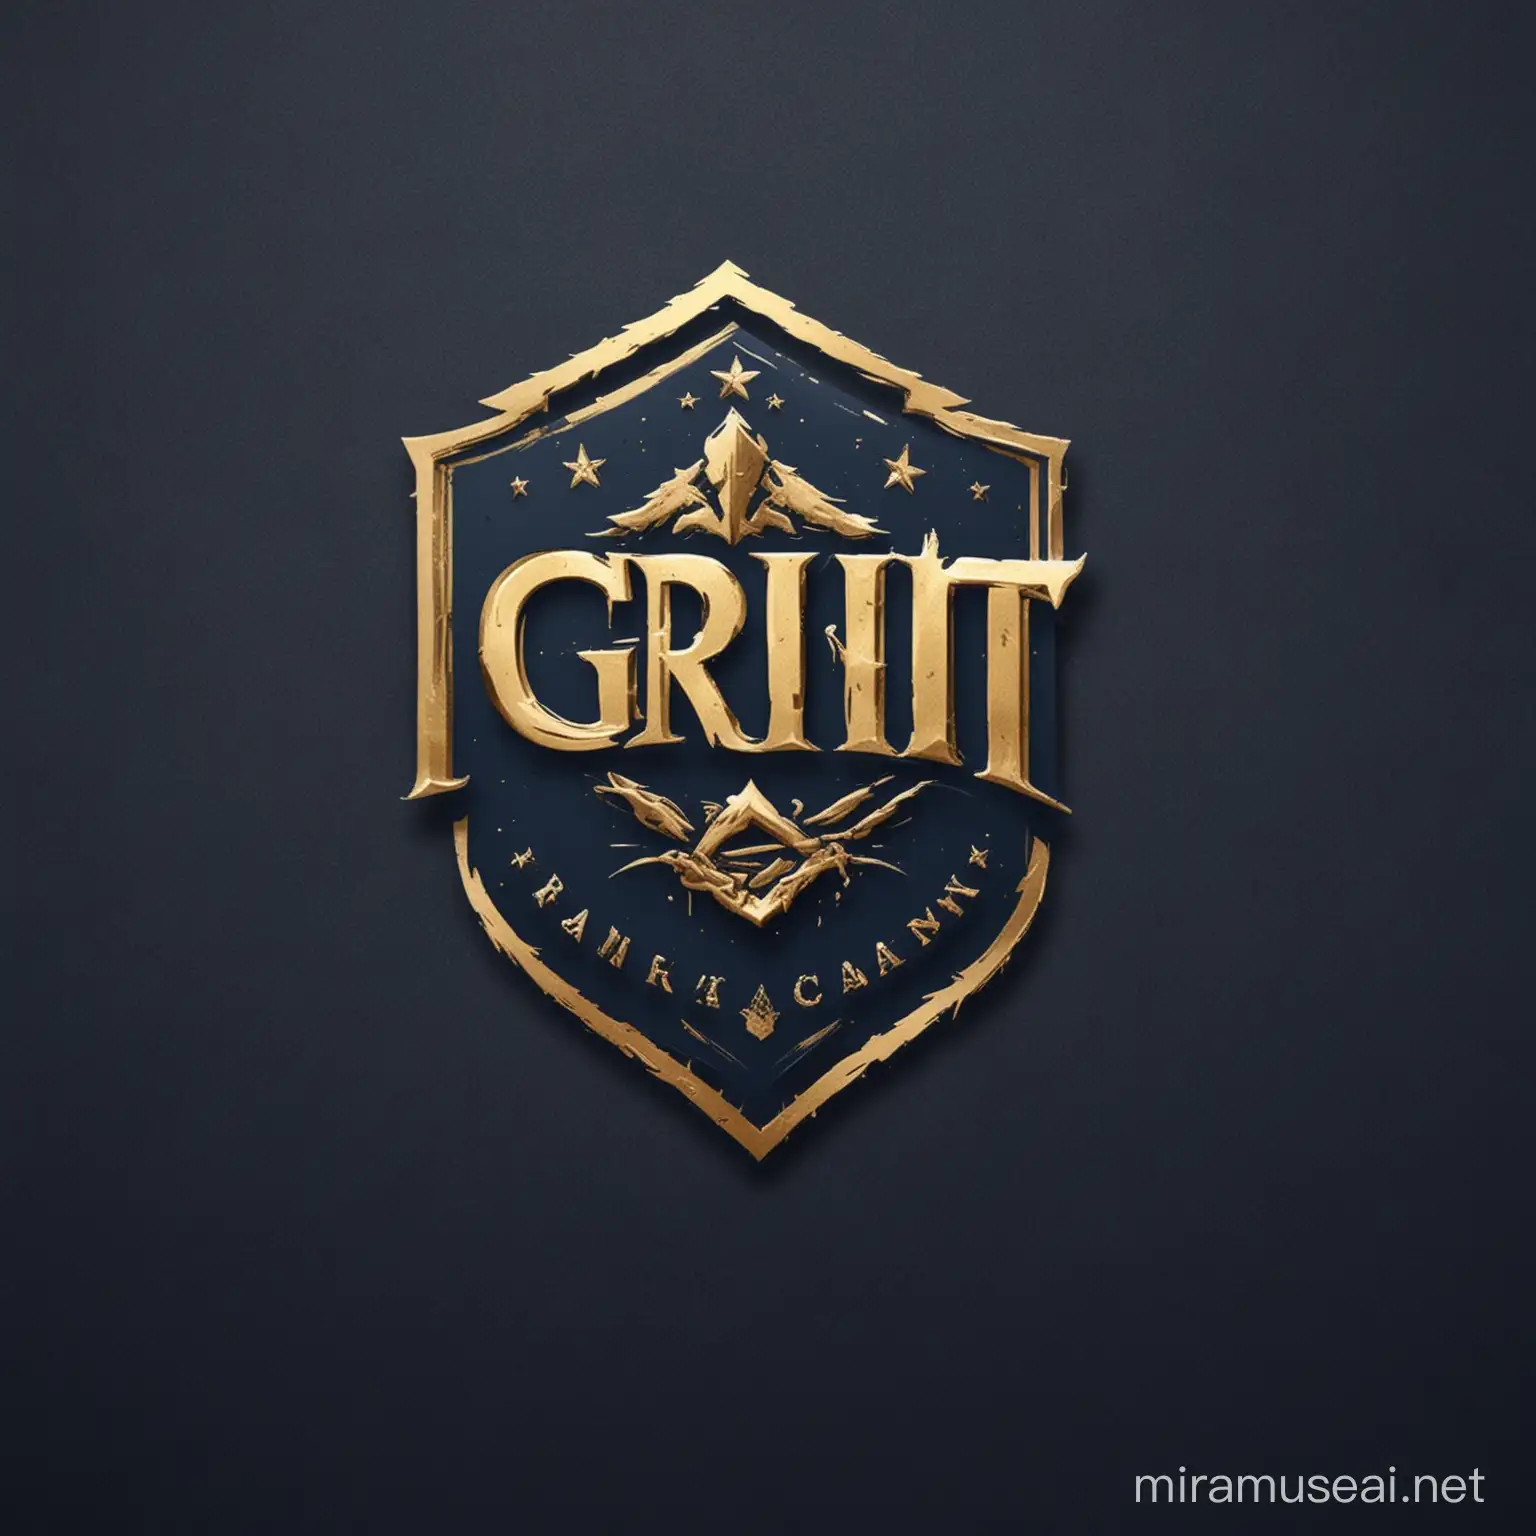 Grit Academy Impressive and Dignified Logo in Gold and Navy